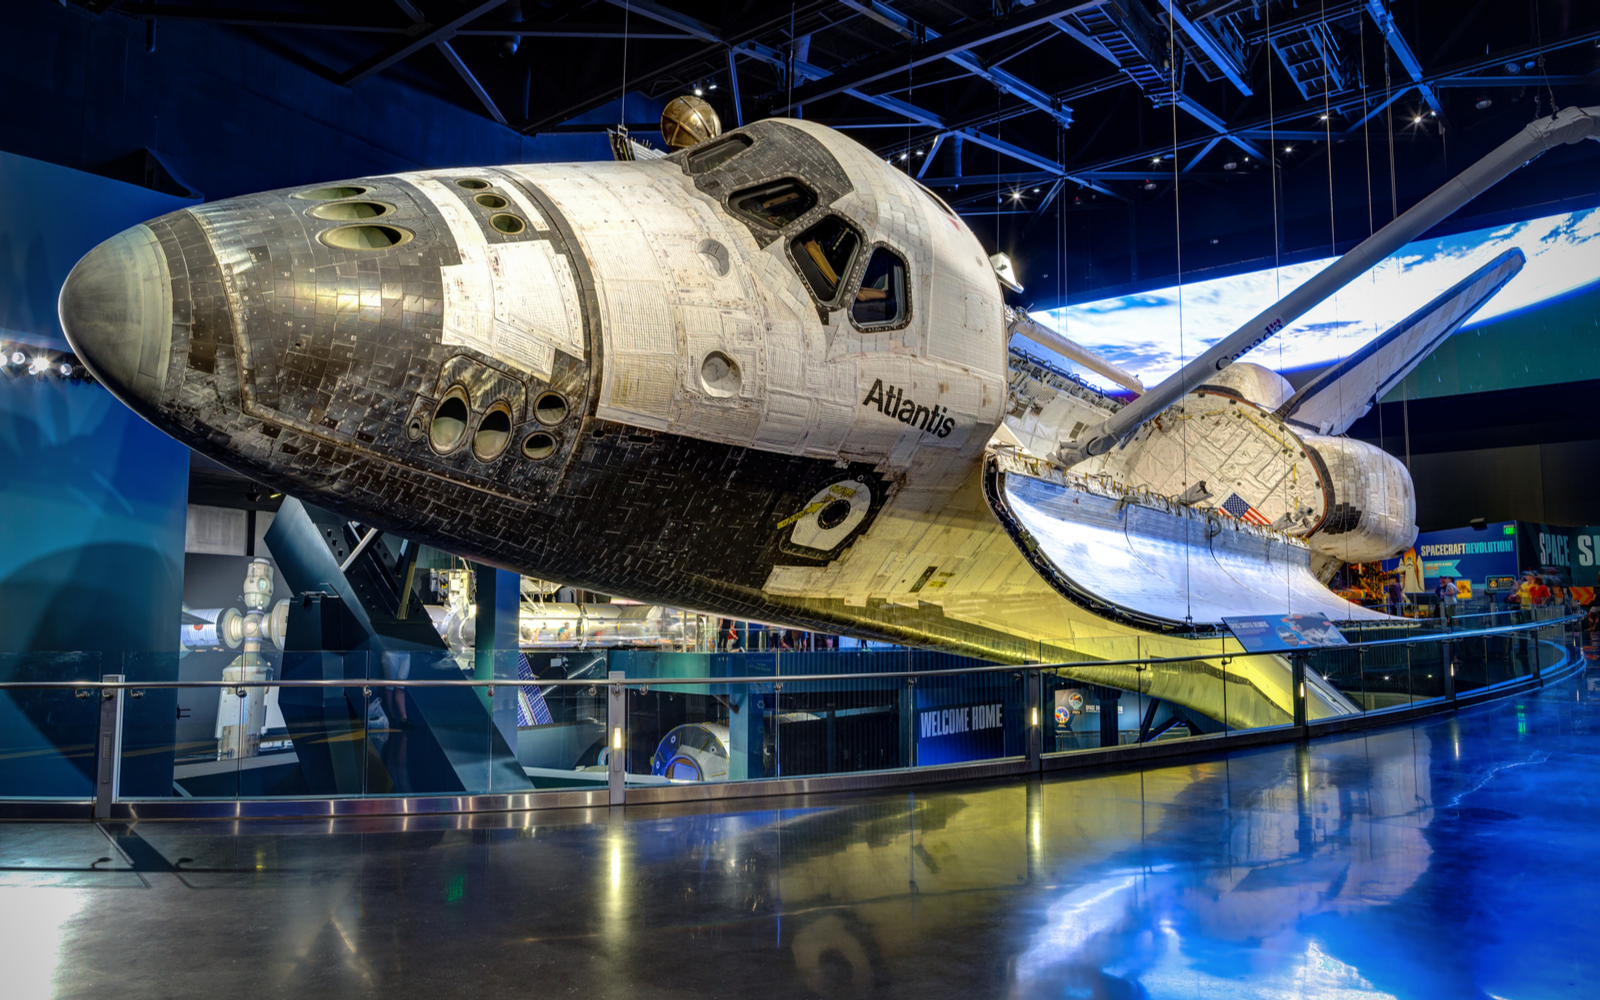 Photo of Atlantis on its side at one of the best museums in Florida, the Kennedy Space Center